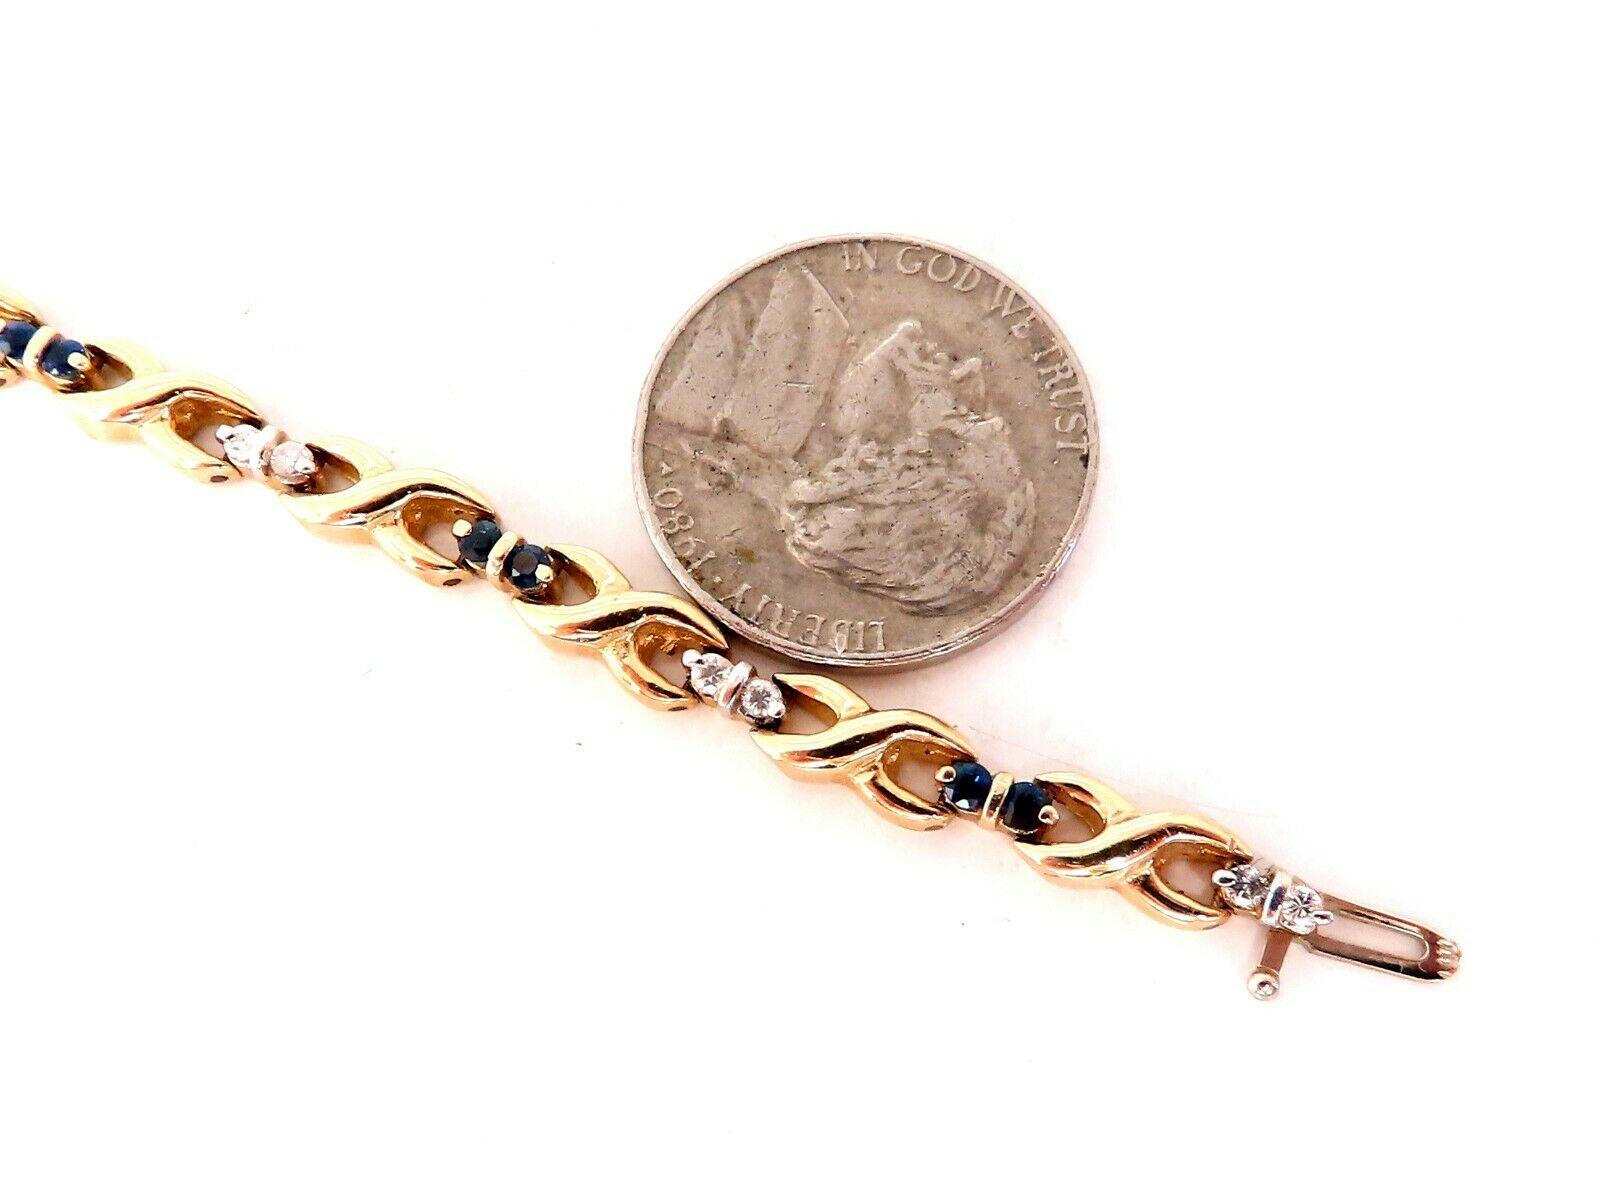 .80ct Natural Round Blue Sapphire Bracelet.

2mm average each.

Diamonds: .36ct. 

H color, Vs-2 clarity.

14kt. yellow gold

Bracelet measures 7 inches.

4.6mm wide

Free Insured shipping.

12.1 Grams